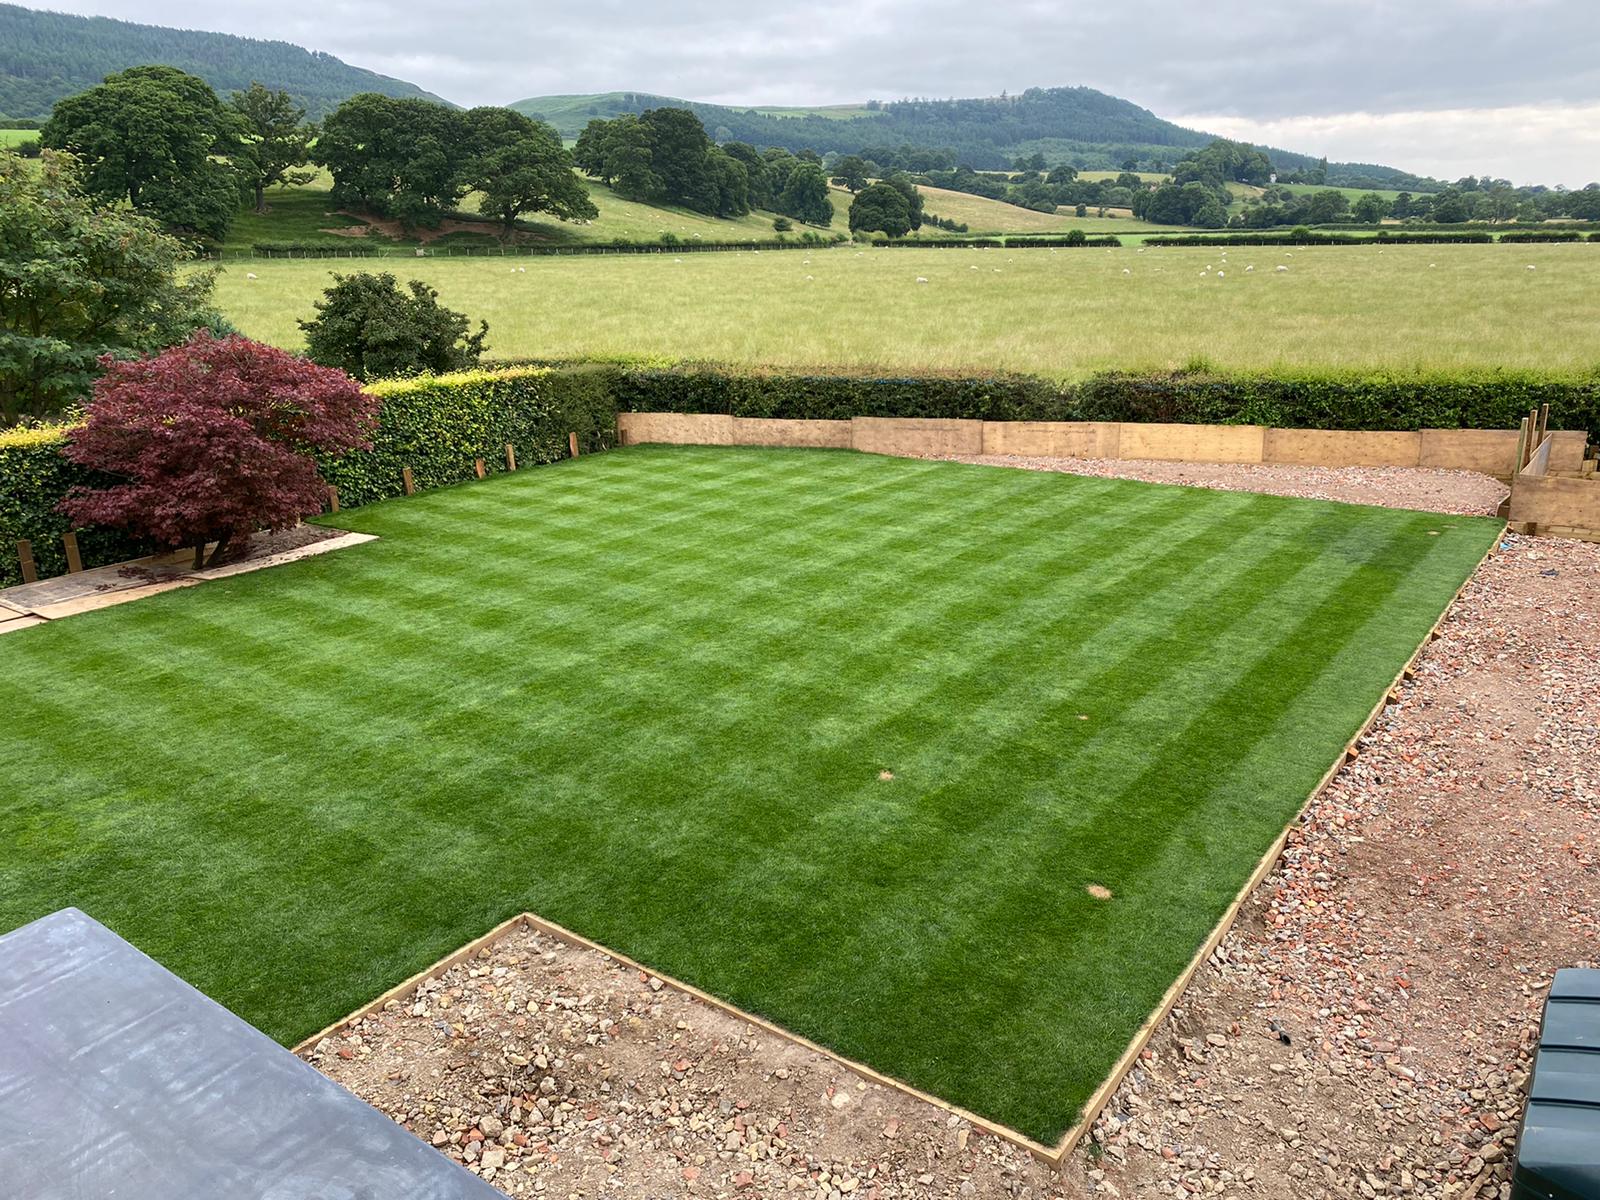 What do I need to get stripes on my lawn?